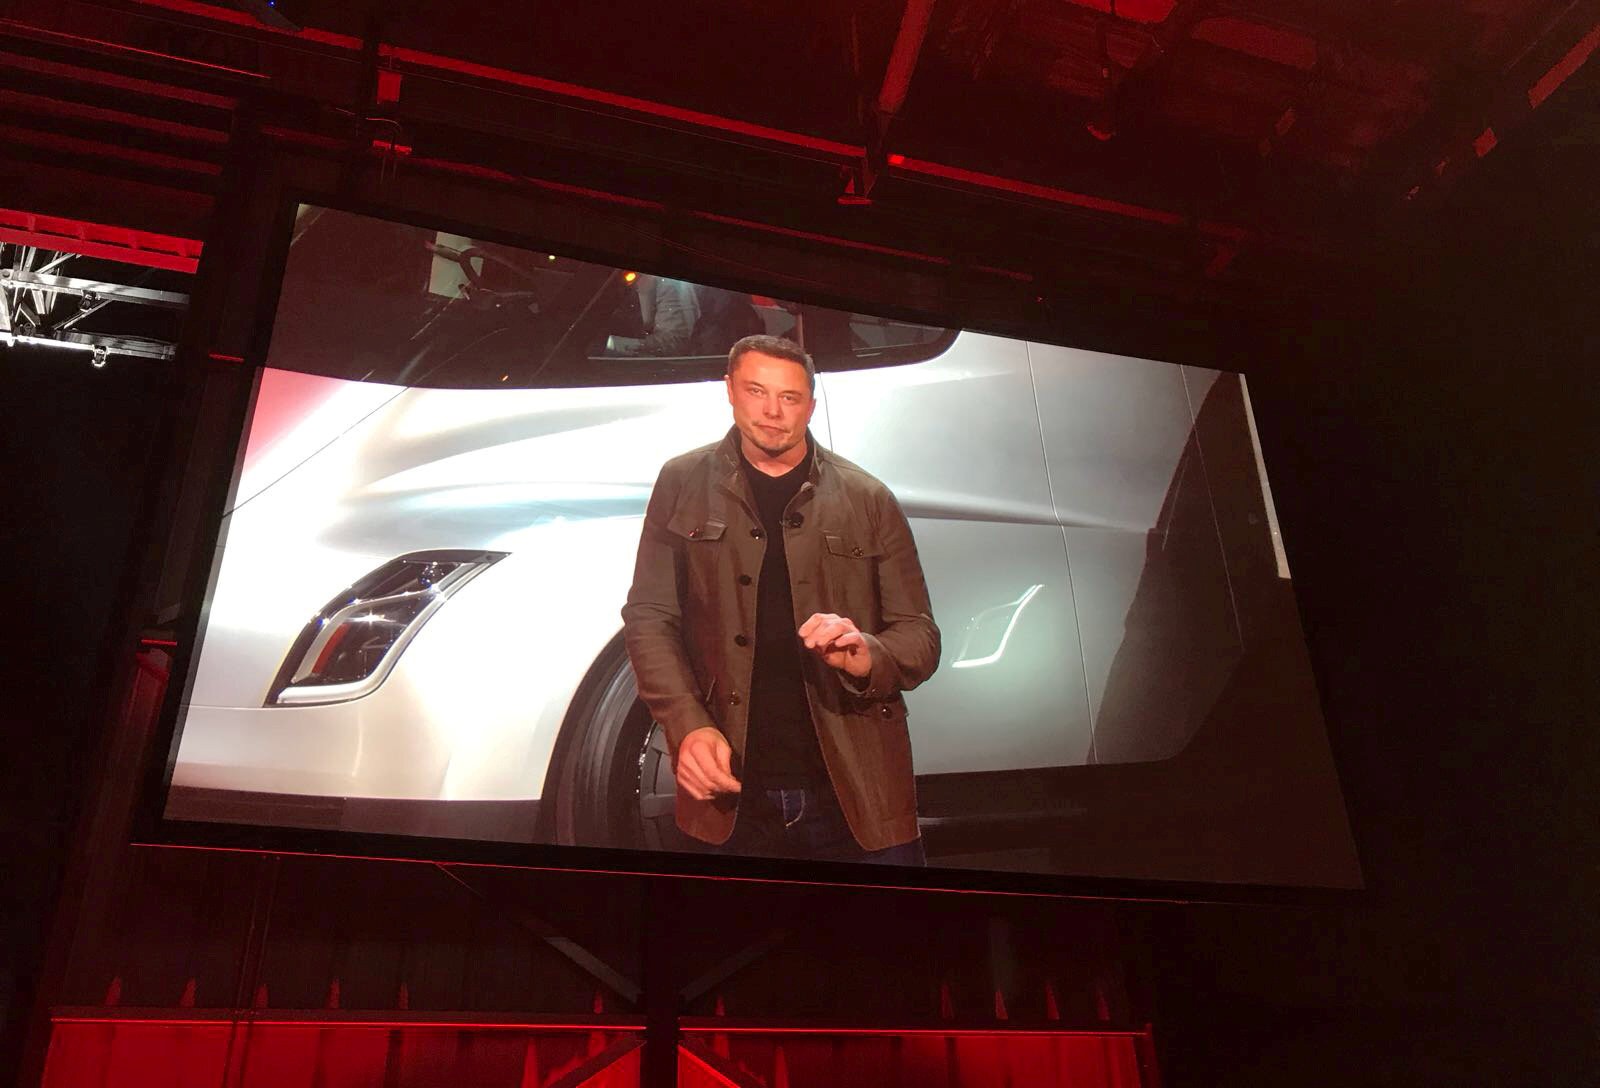 Tesla CEO Elon Musk appears on screen as he unveils the company’s new electric semi truck during a presentation in California, in November last year. It seems pretty certain that Tesla would not even exist were it not for Musk. Photo: Reuters